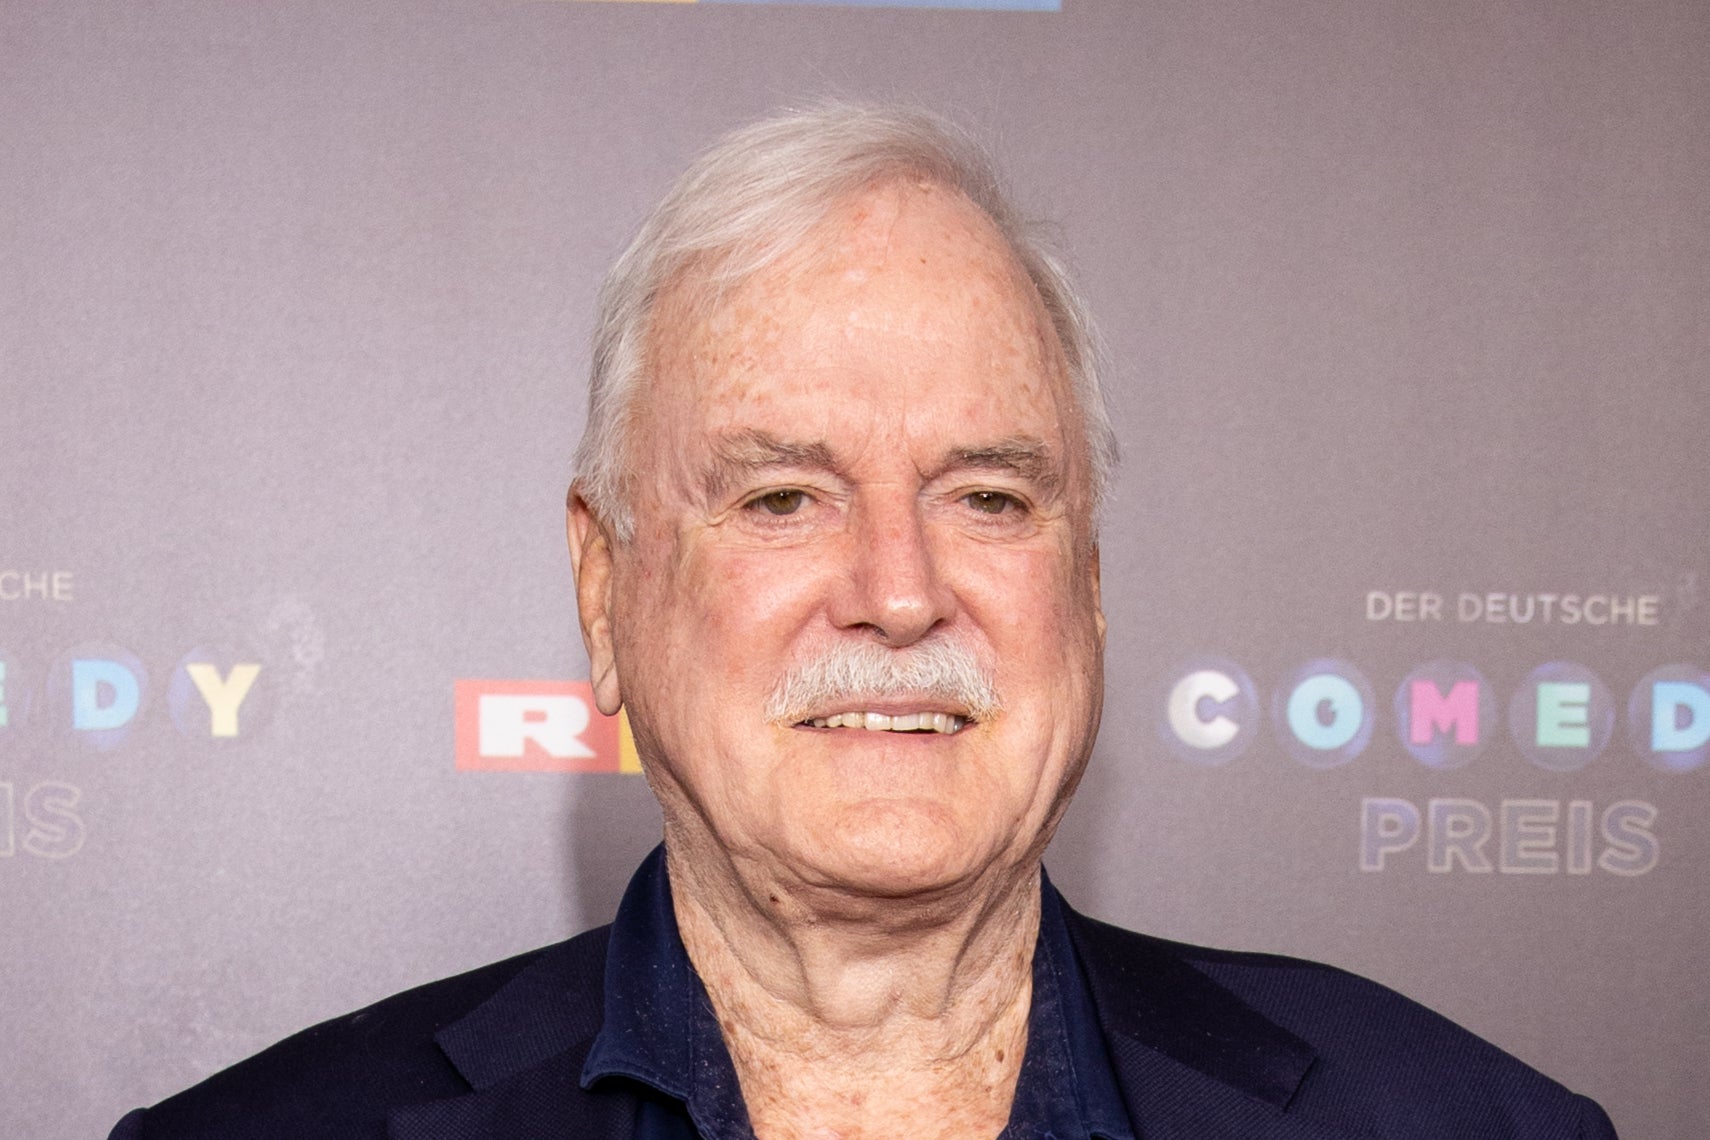 Cleese admitted to spending approximately £17,000 per year on stem cell treatment